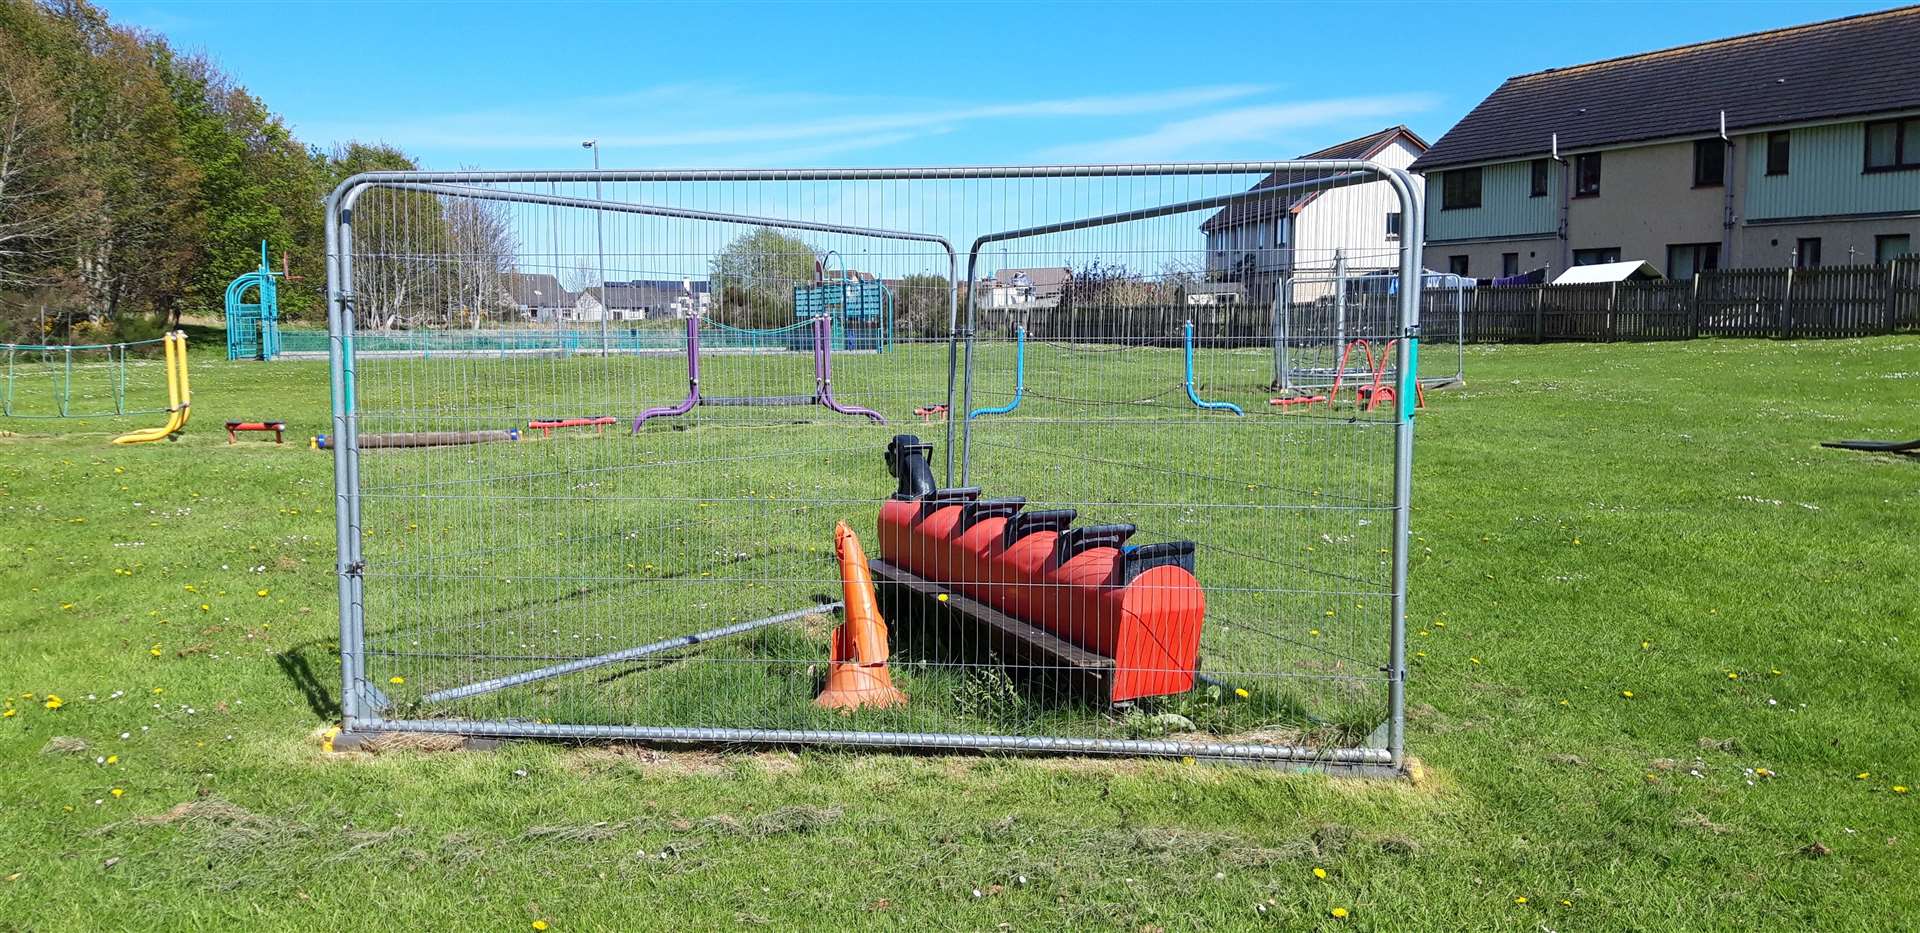 Play parks across the county are in need of refurbishment, including this one at Dornoch.